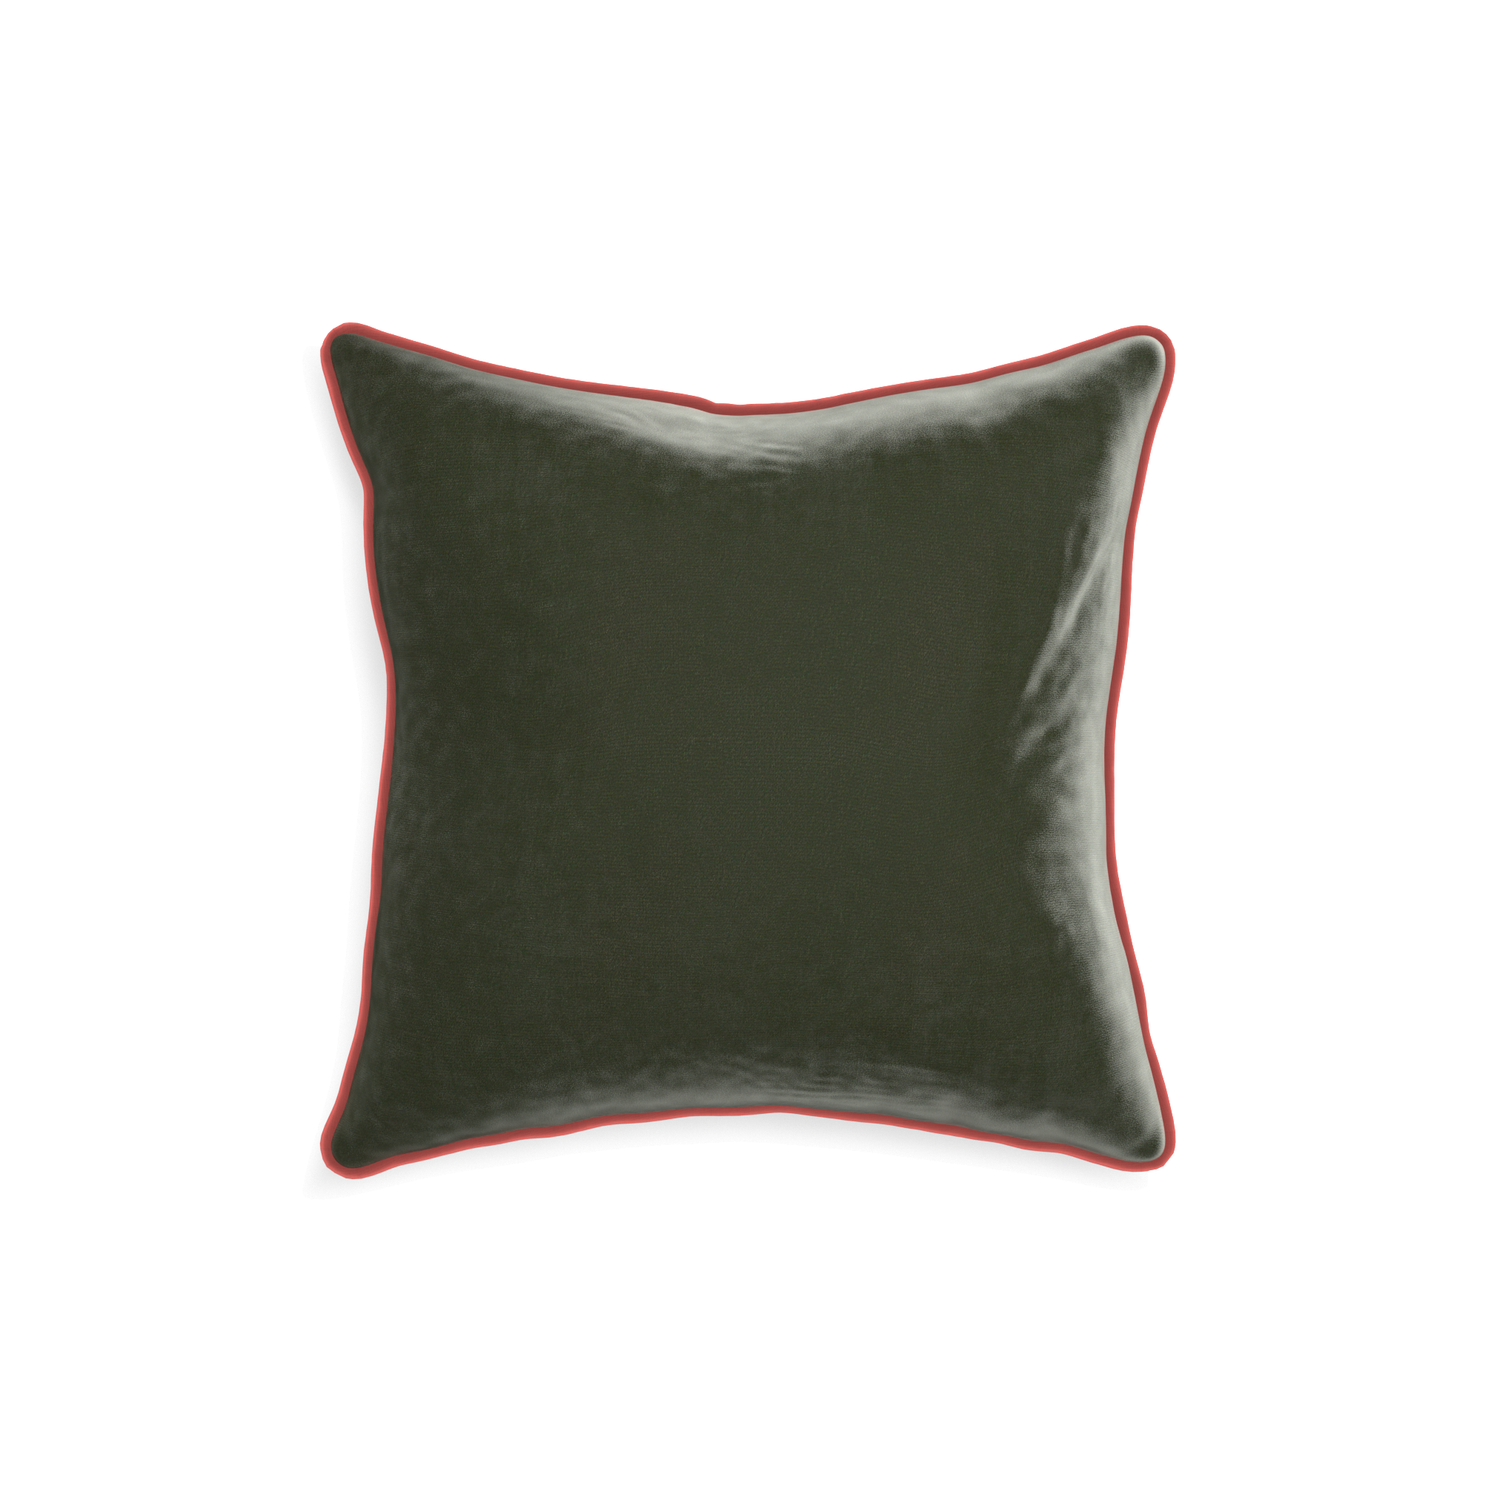 square fern green velvet pillow with coral piping